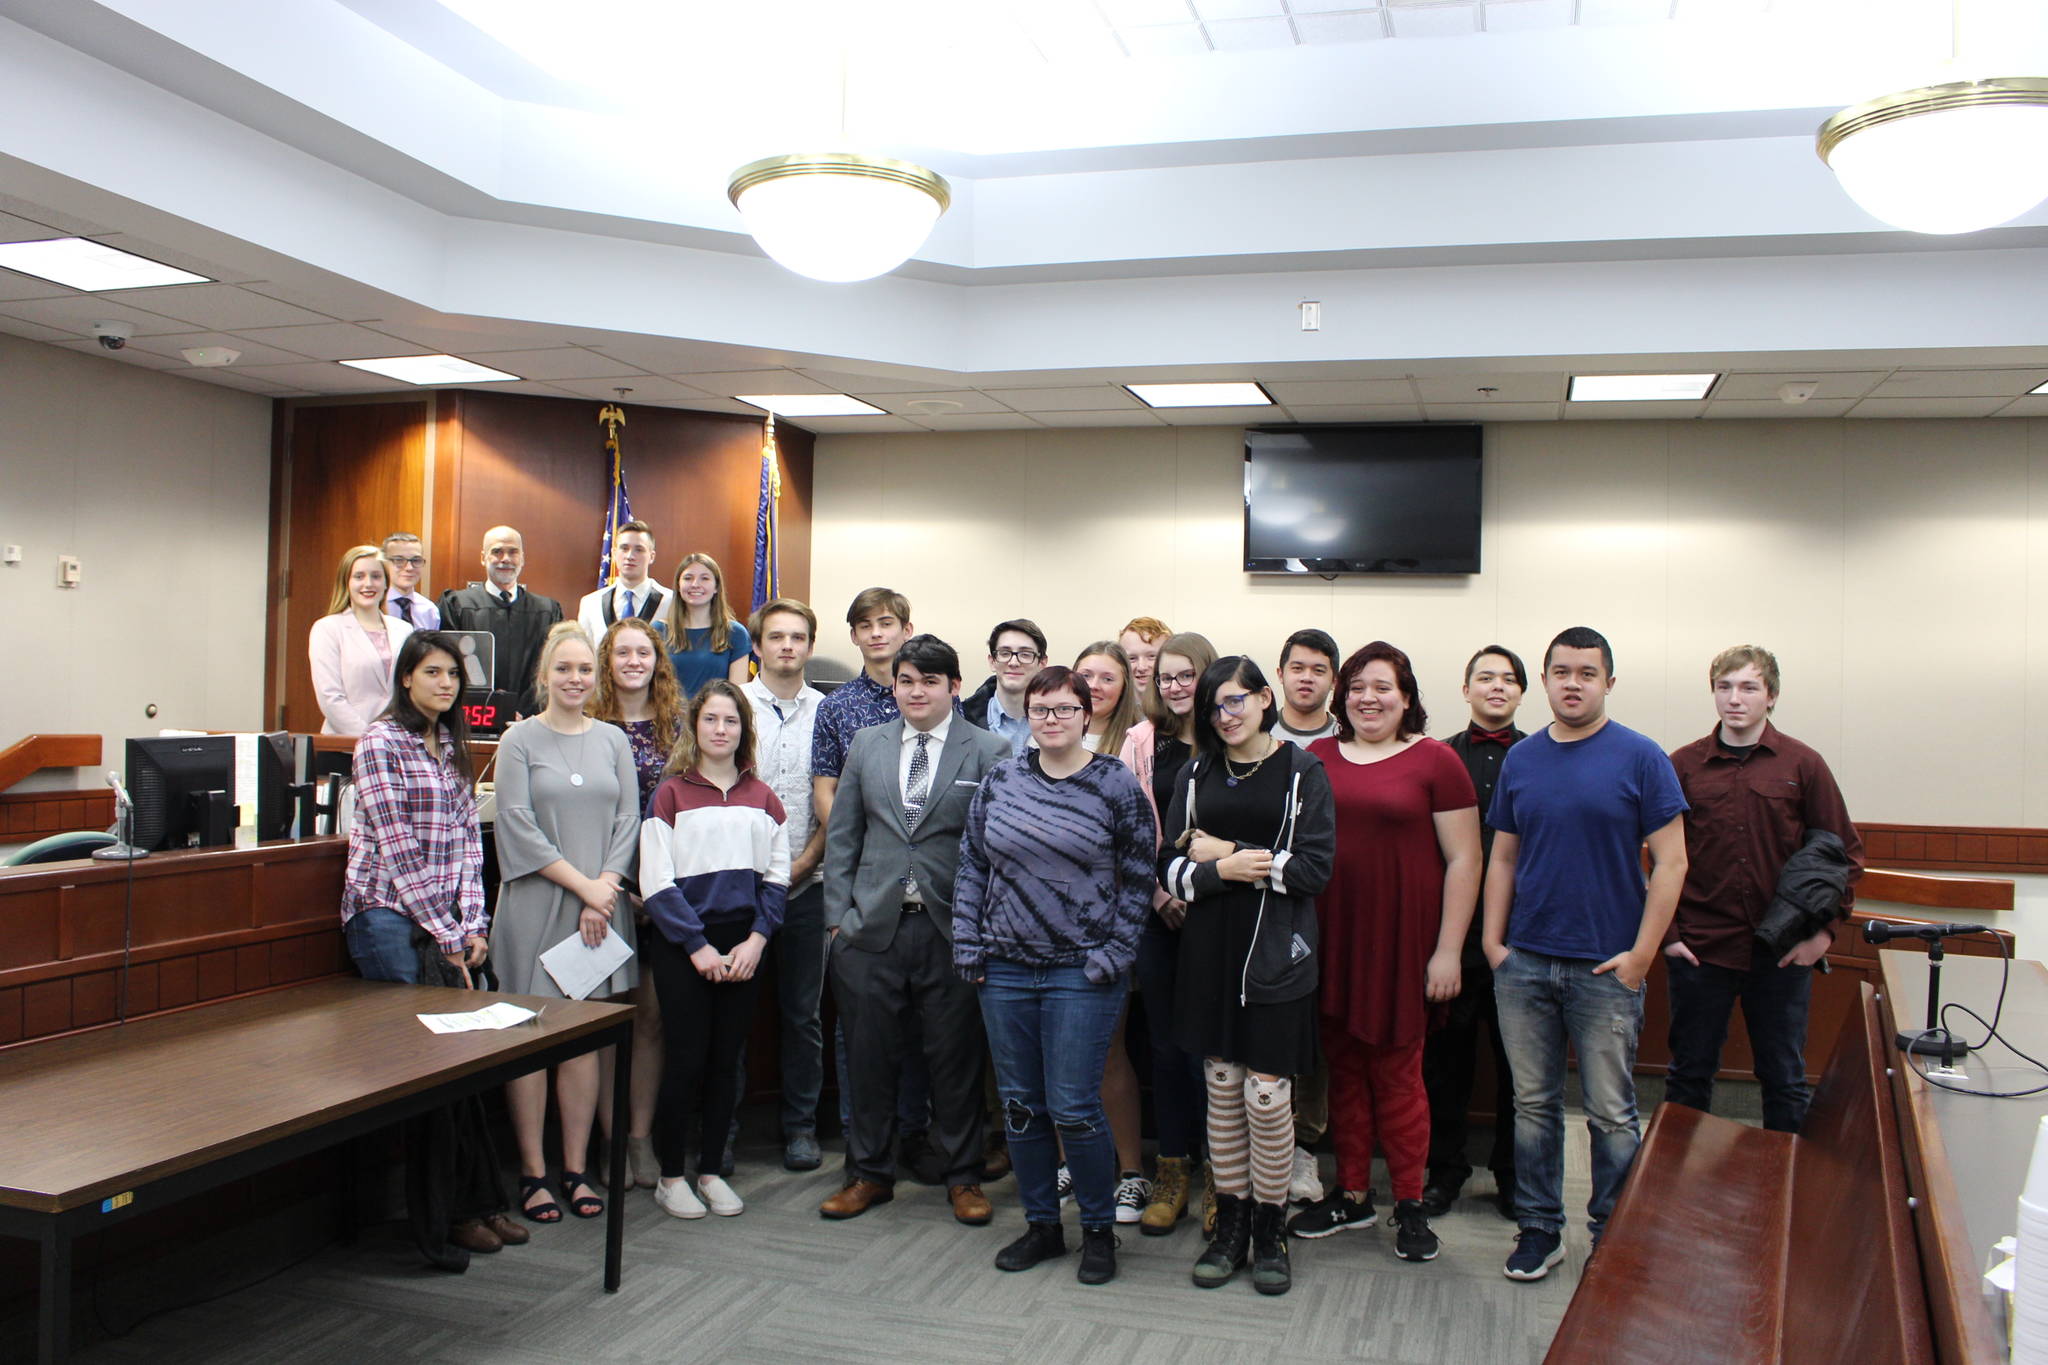 Nikiski Middle/High School seniors pose for a group photo during a mock trial at the Kenai Courthouse on Dec. 3, 2019. (Photo by Brian Mazurek/Peninsula Clarion)